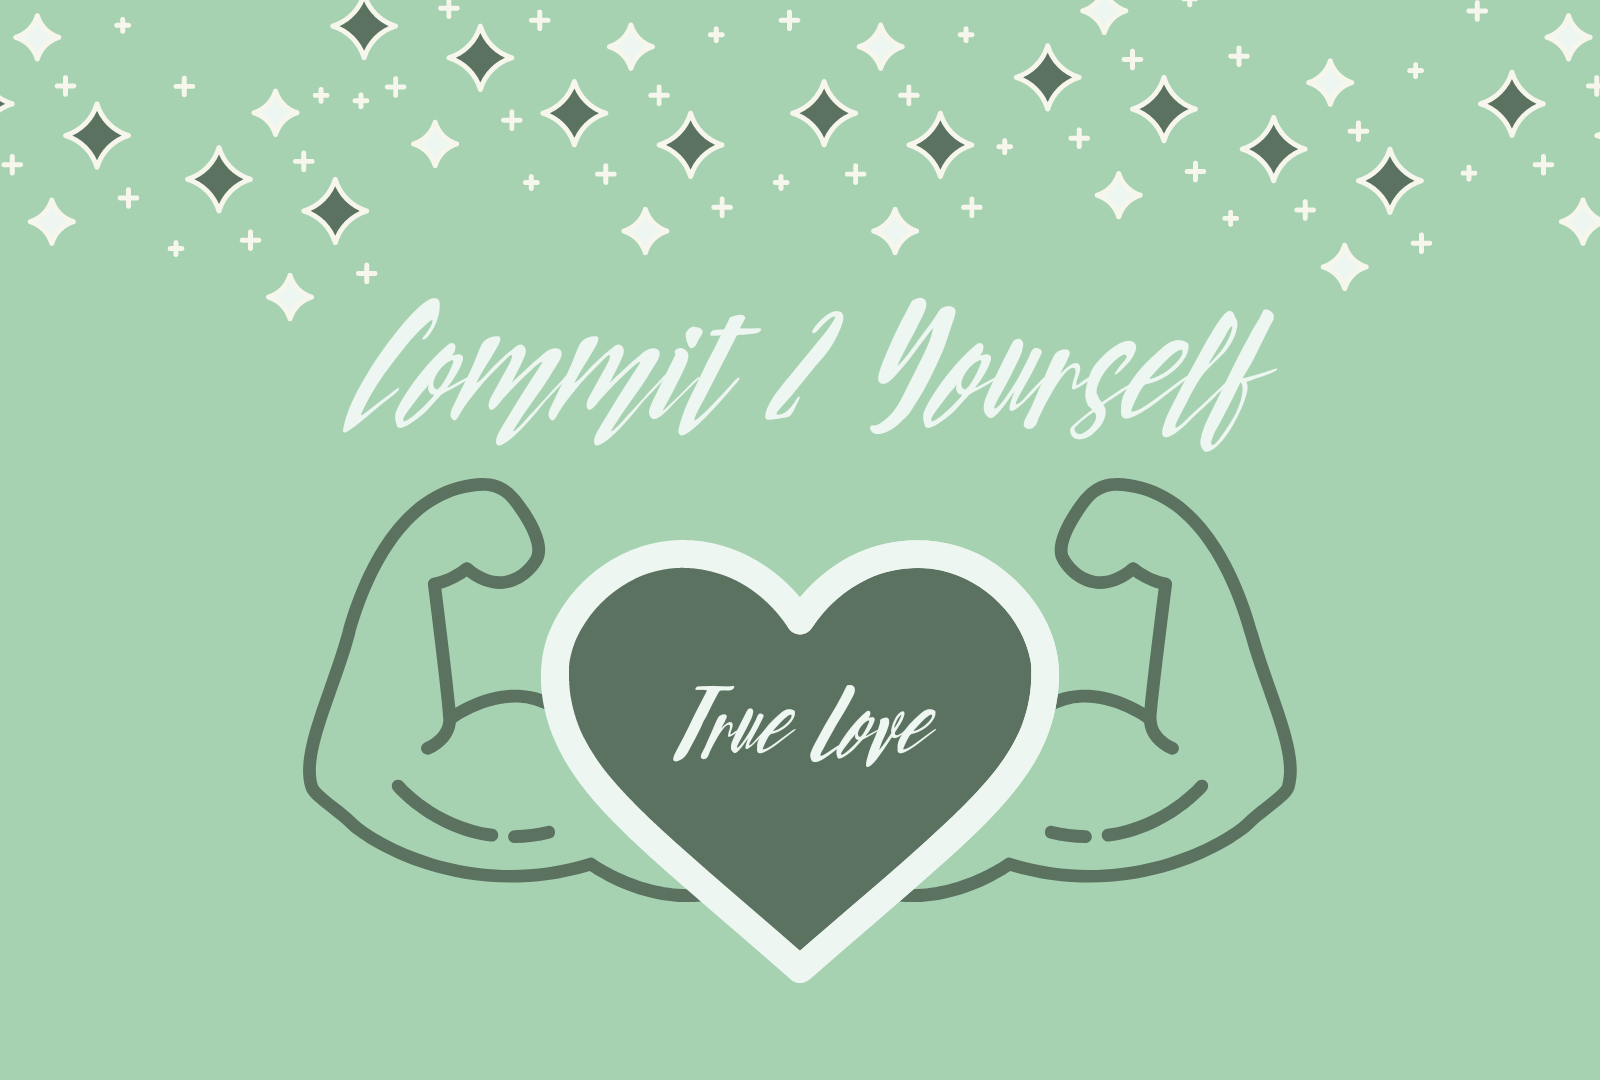 Commit 2 yourself